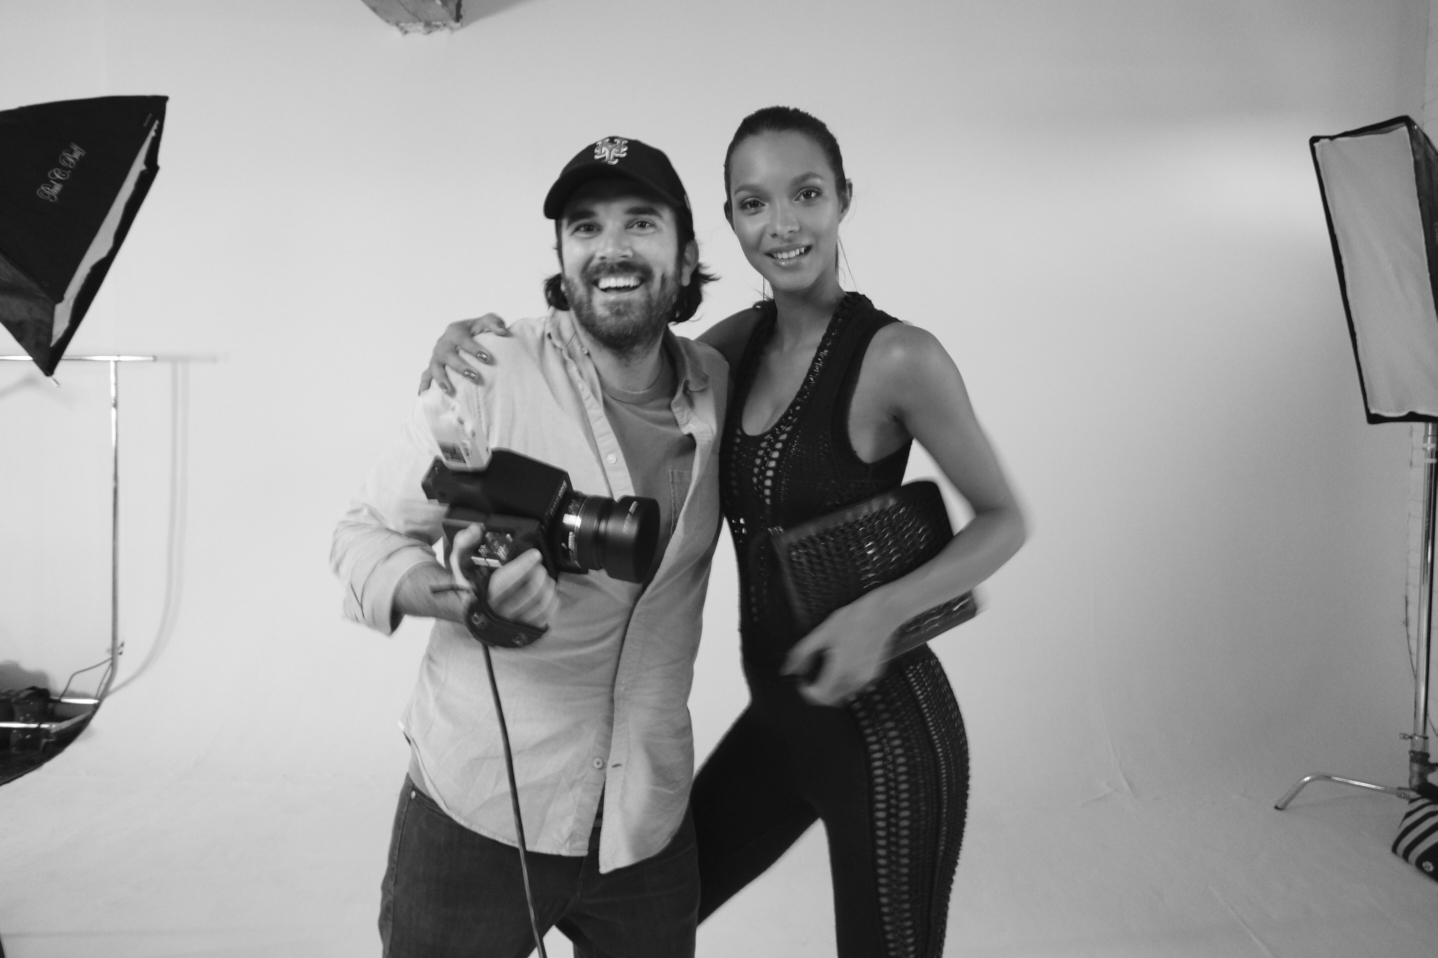 Behind the scenes with New York Fashion Photographer